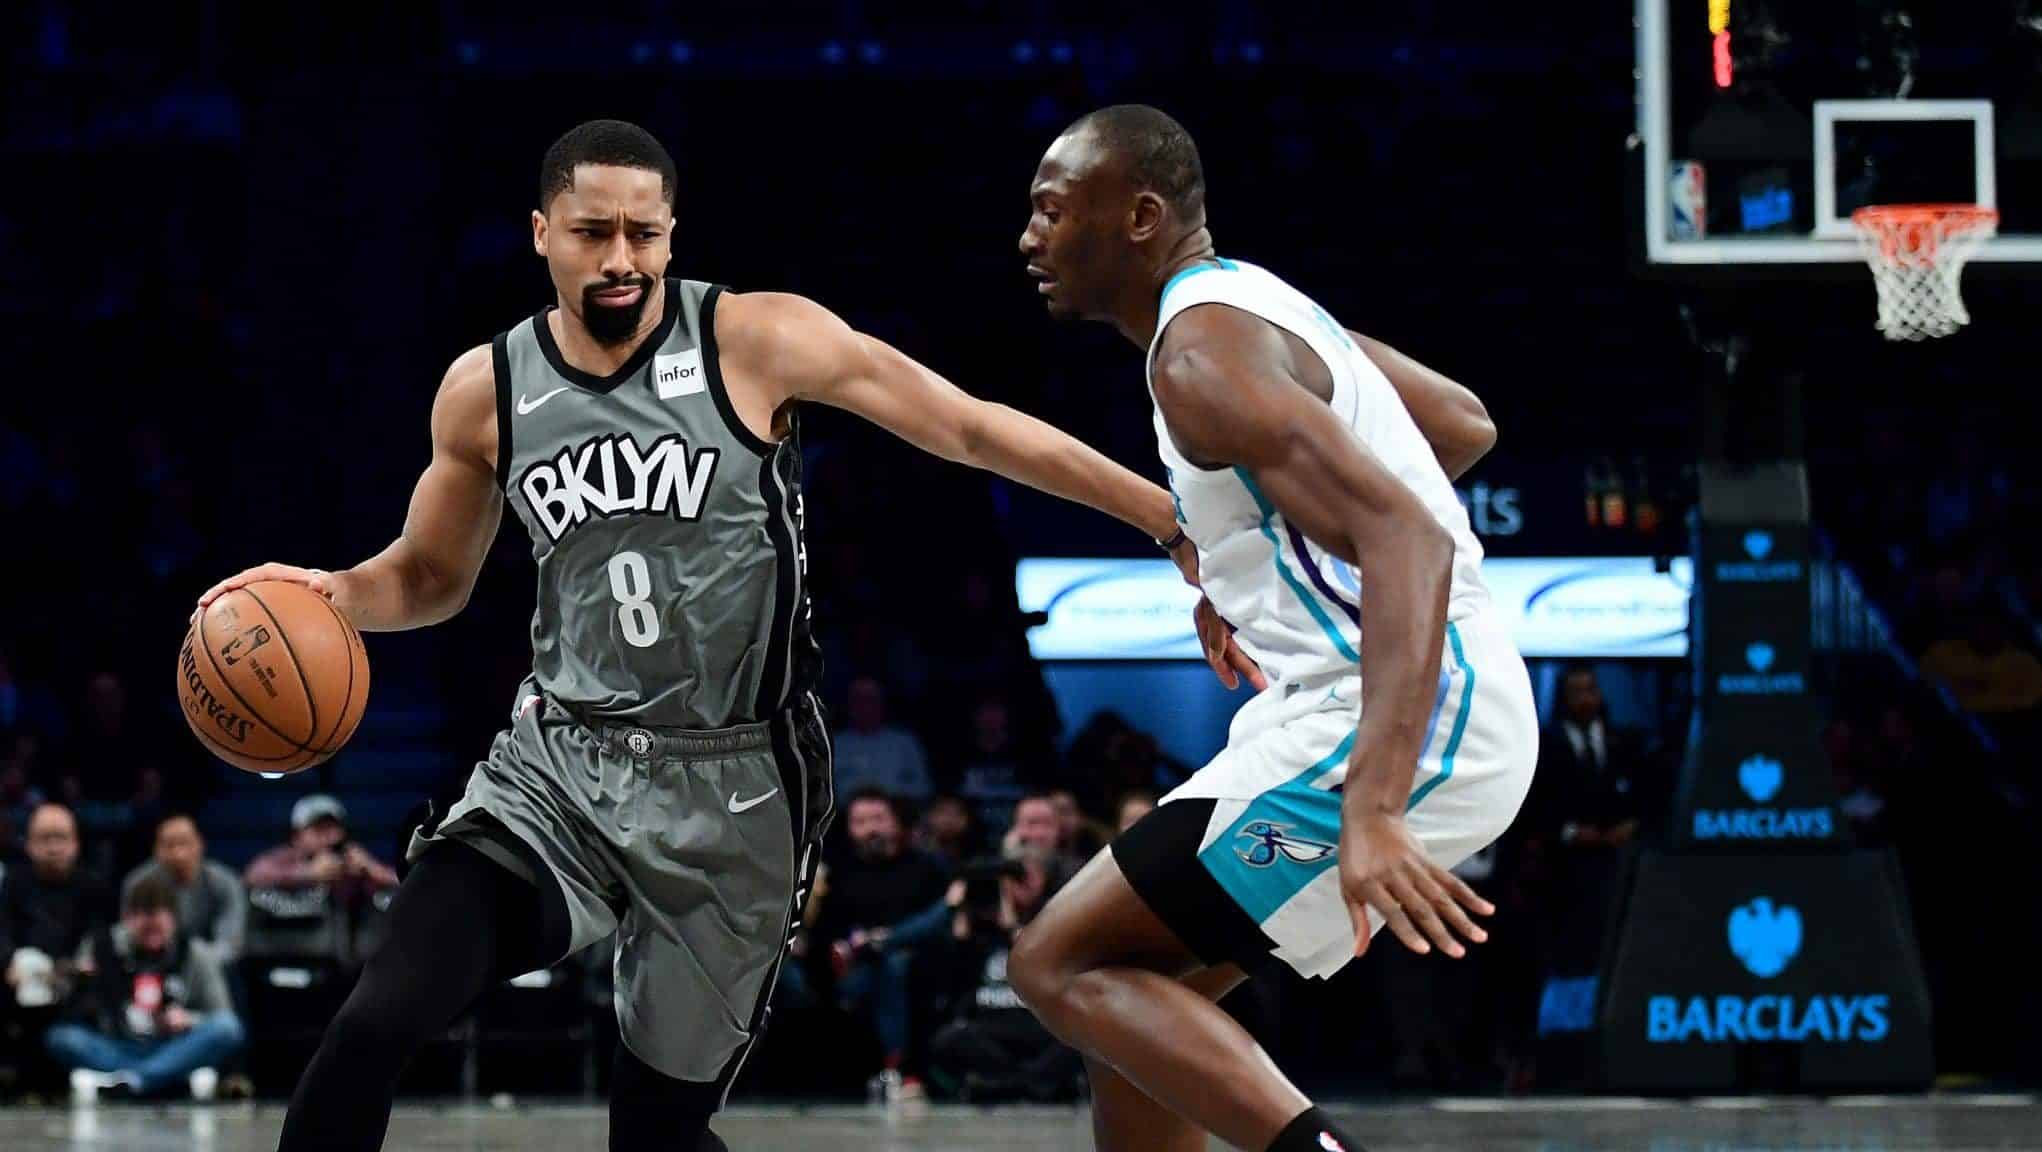 NEW YORK, NEW YORK - DECEMBER 11: Spencer Dinwiddie #8 of the Brooklyn Nets drives past Bismack Biyombo #8 of the Charlotte Hornets during the first half at Barclays Center on December 11, 2019 in New York City. NOTE TO USER: User expressly acknowledges and agrees that, by downloading and or using this photograph, User is consenting to the terms and conditions of the Getty Images License Agreement.